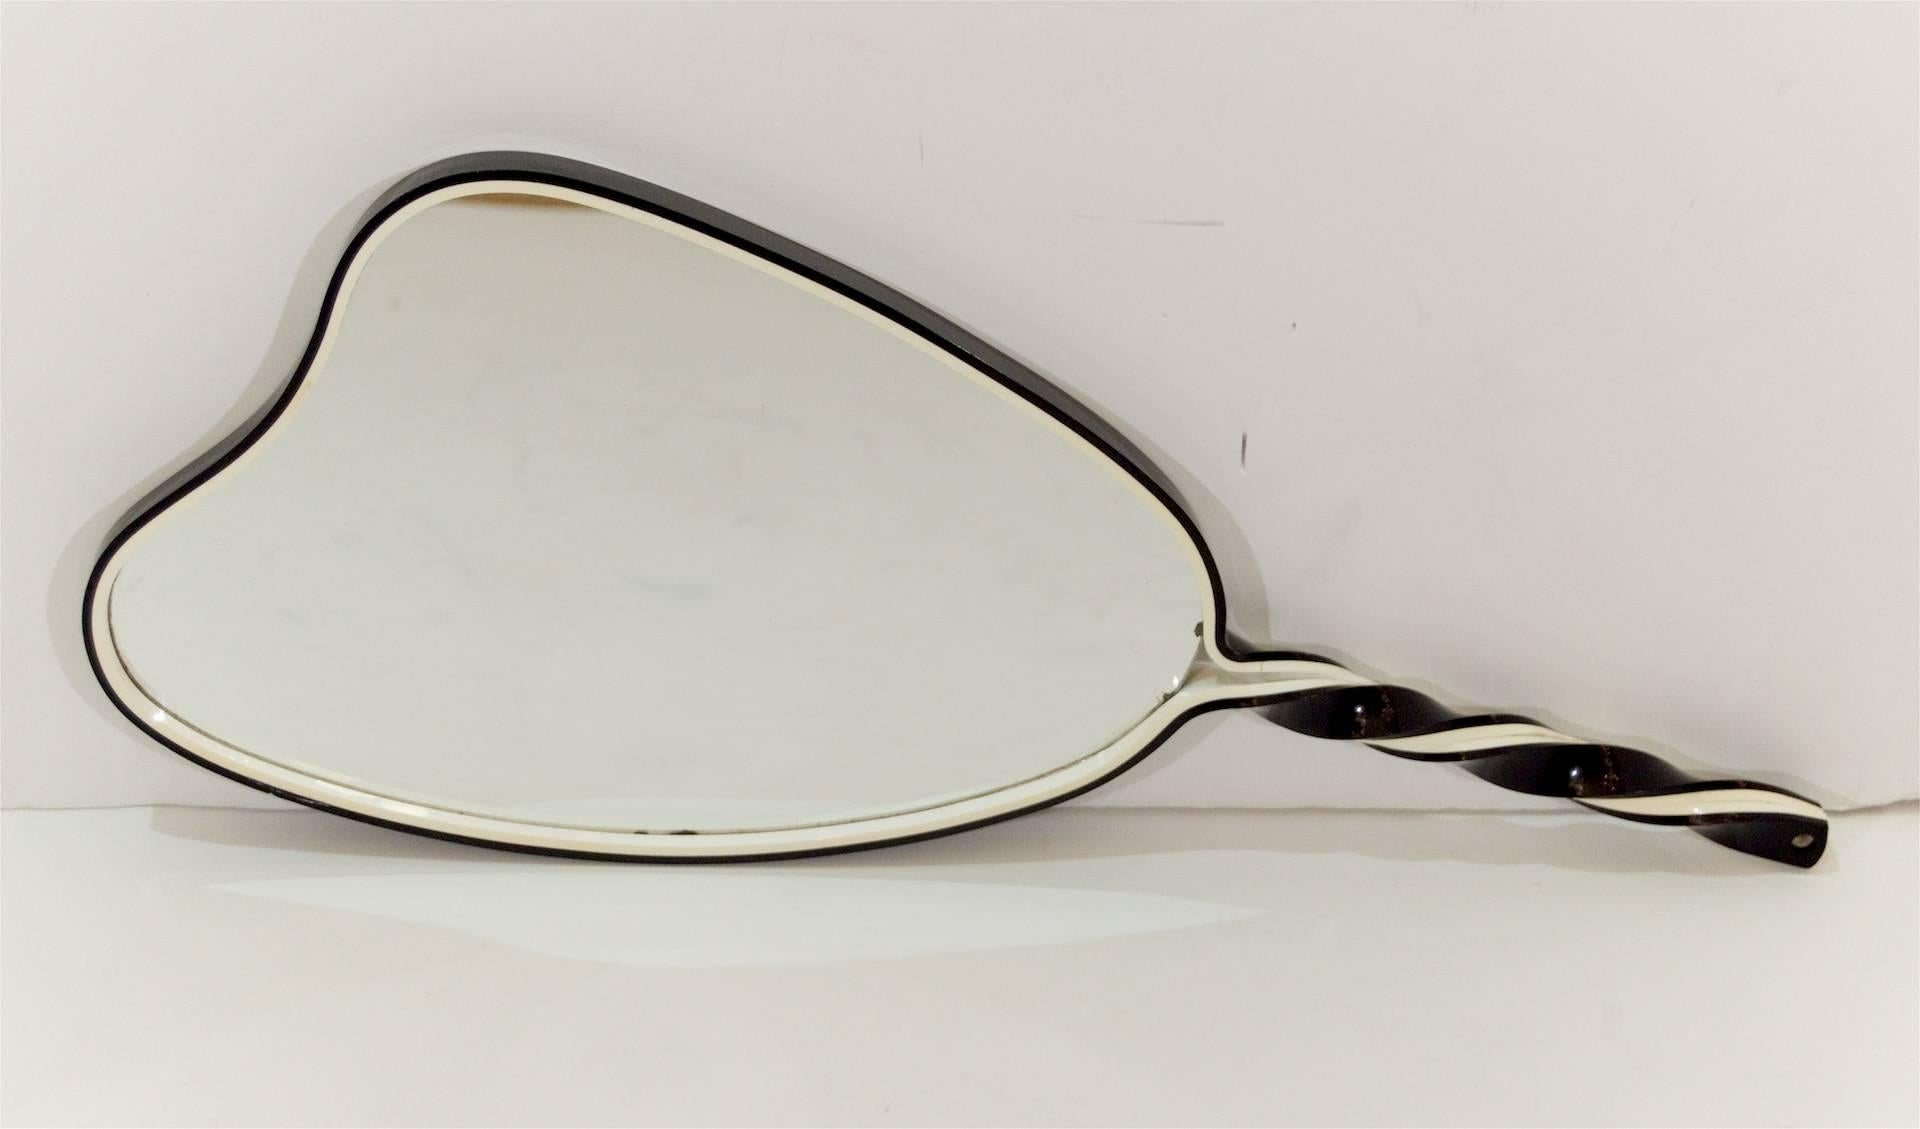 Beautifully formed black and white plexiglass mirror hand mirror, the layers of acrylic twisting to form the handle.